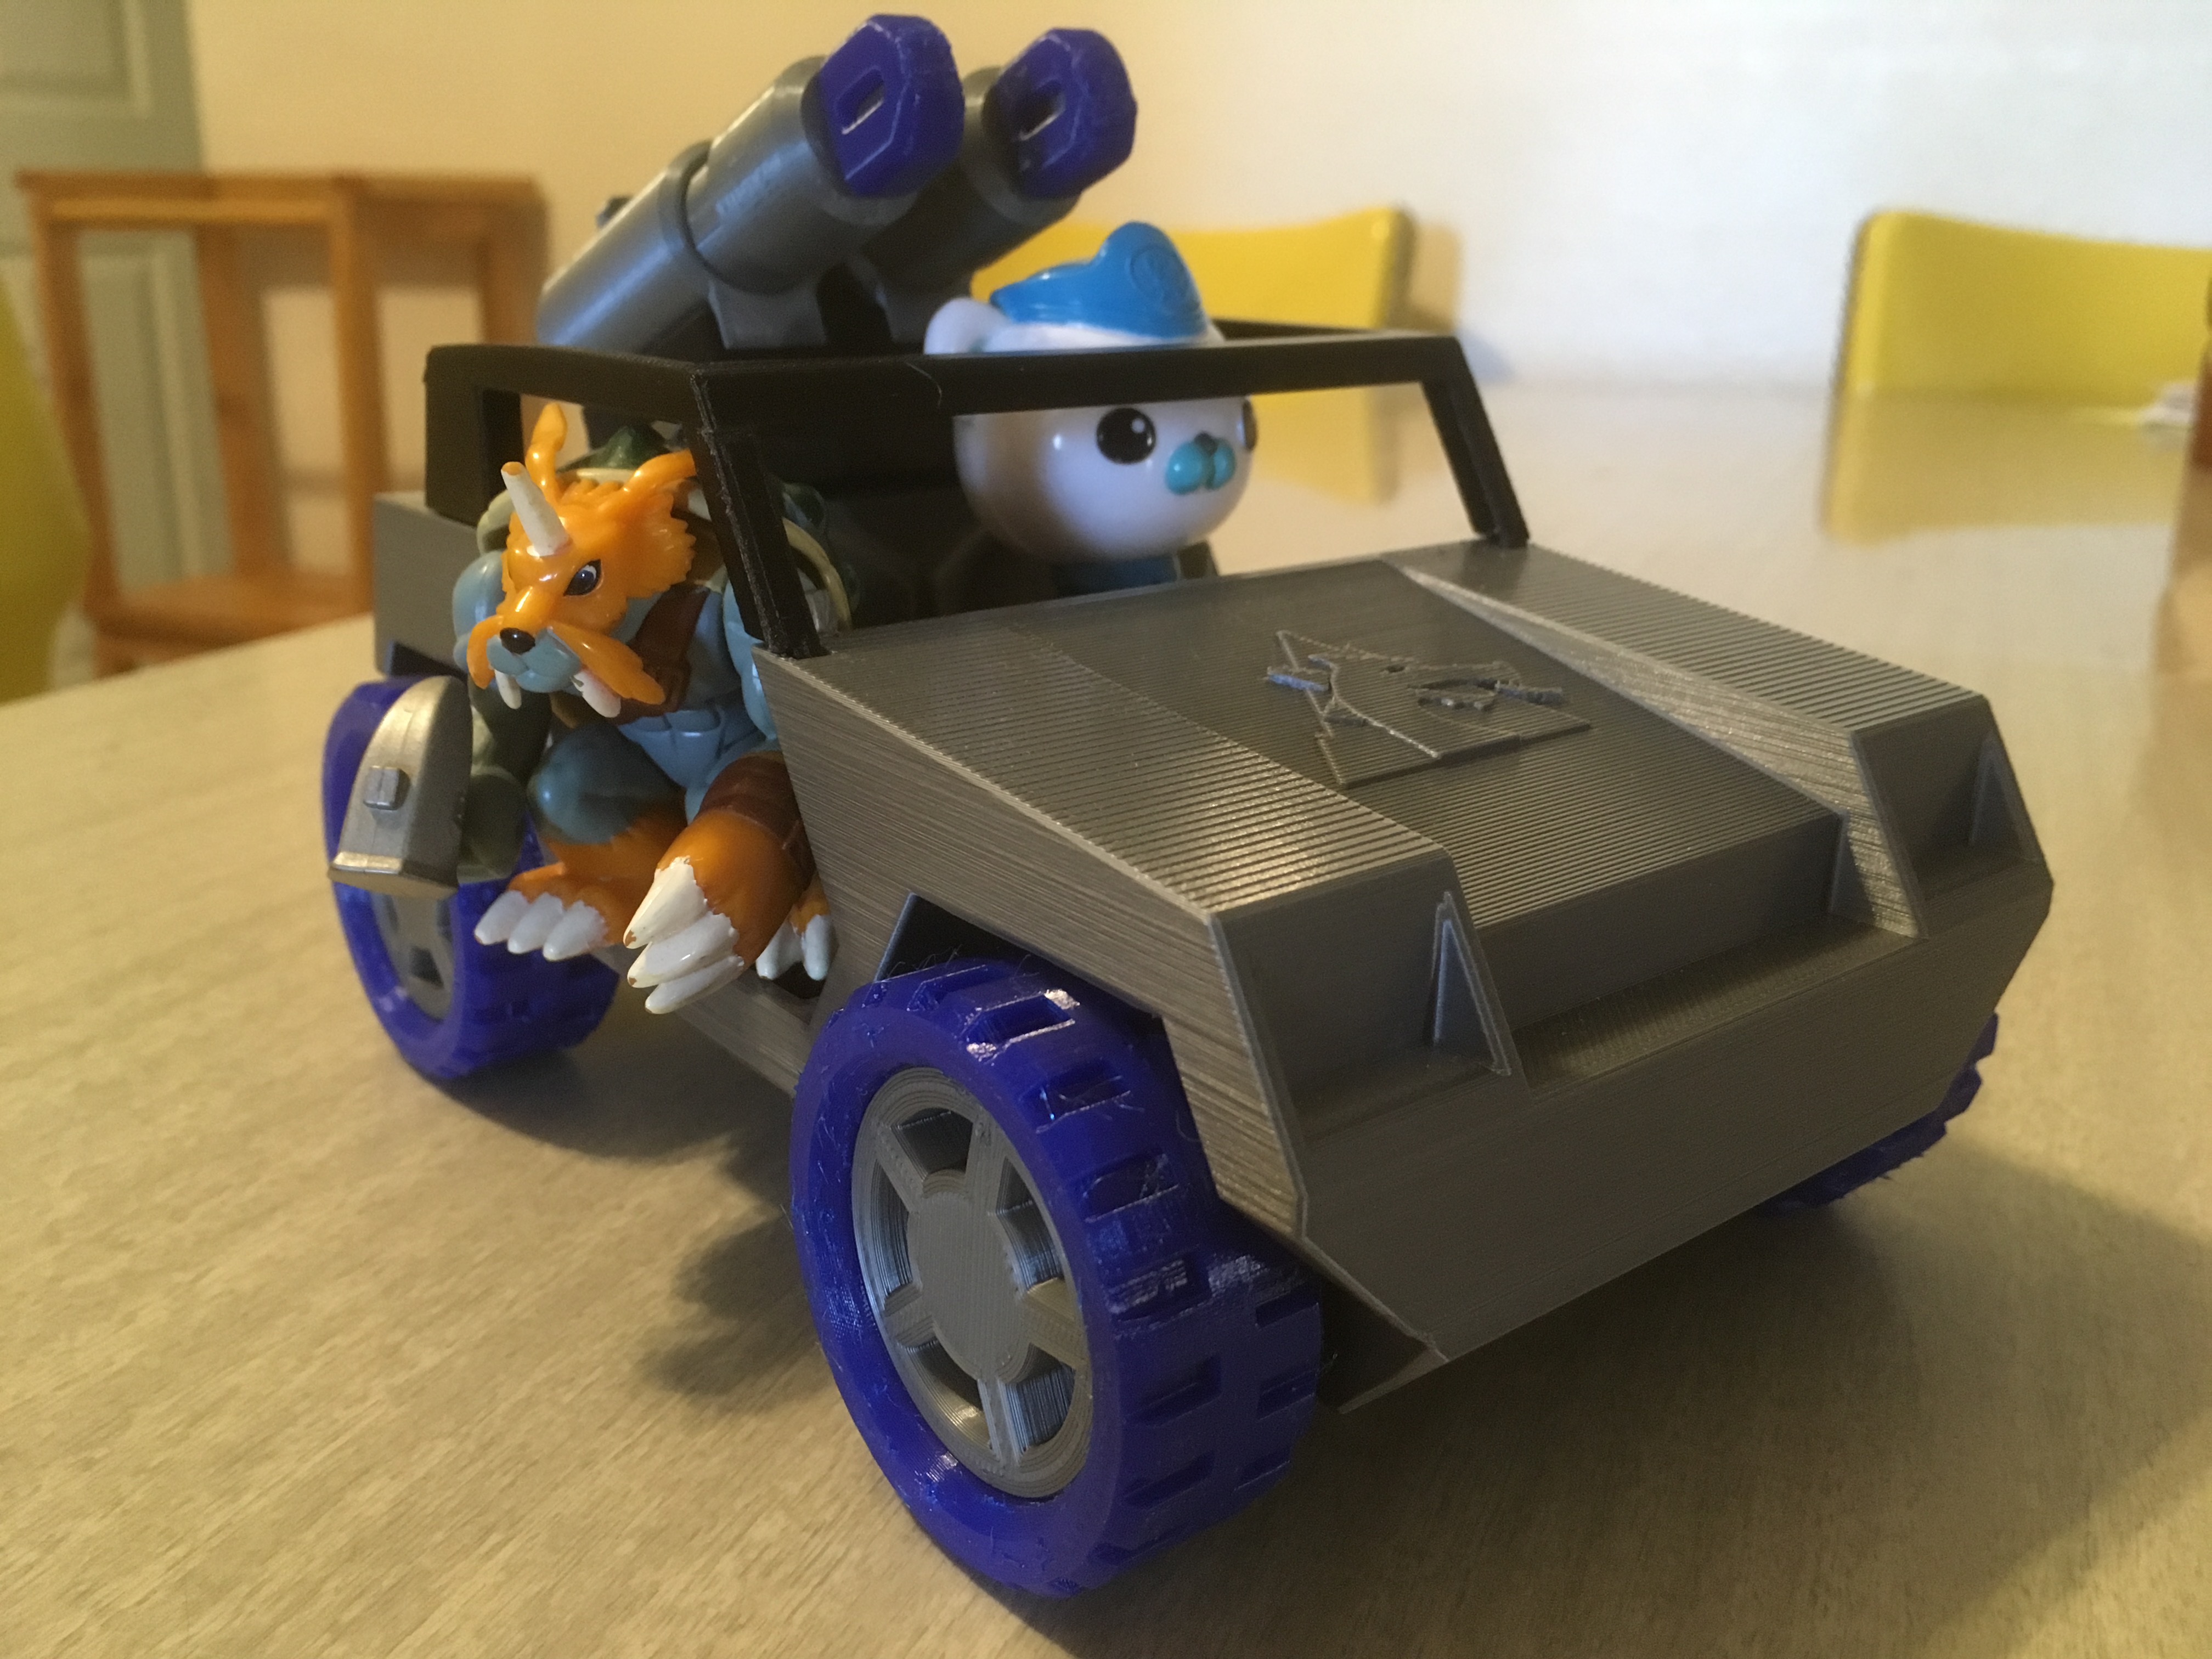 My daughter's Octonauts will likely be taking this vehicle over for their land missions. Zudomon is their friend apparently, which I guess makes sense.